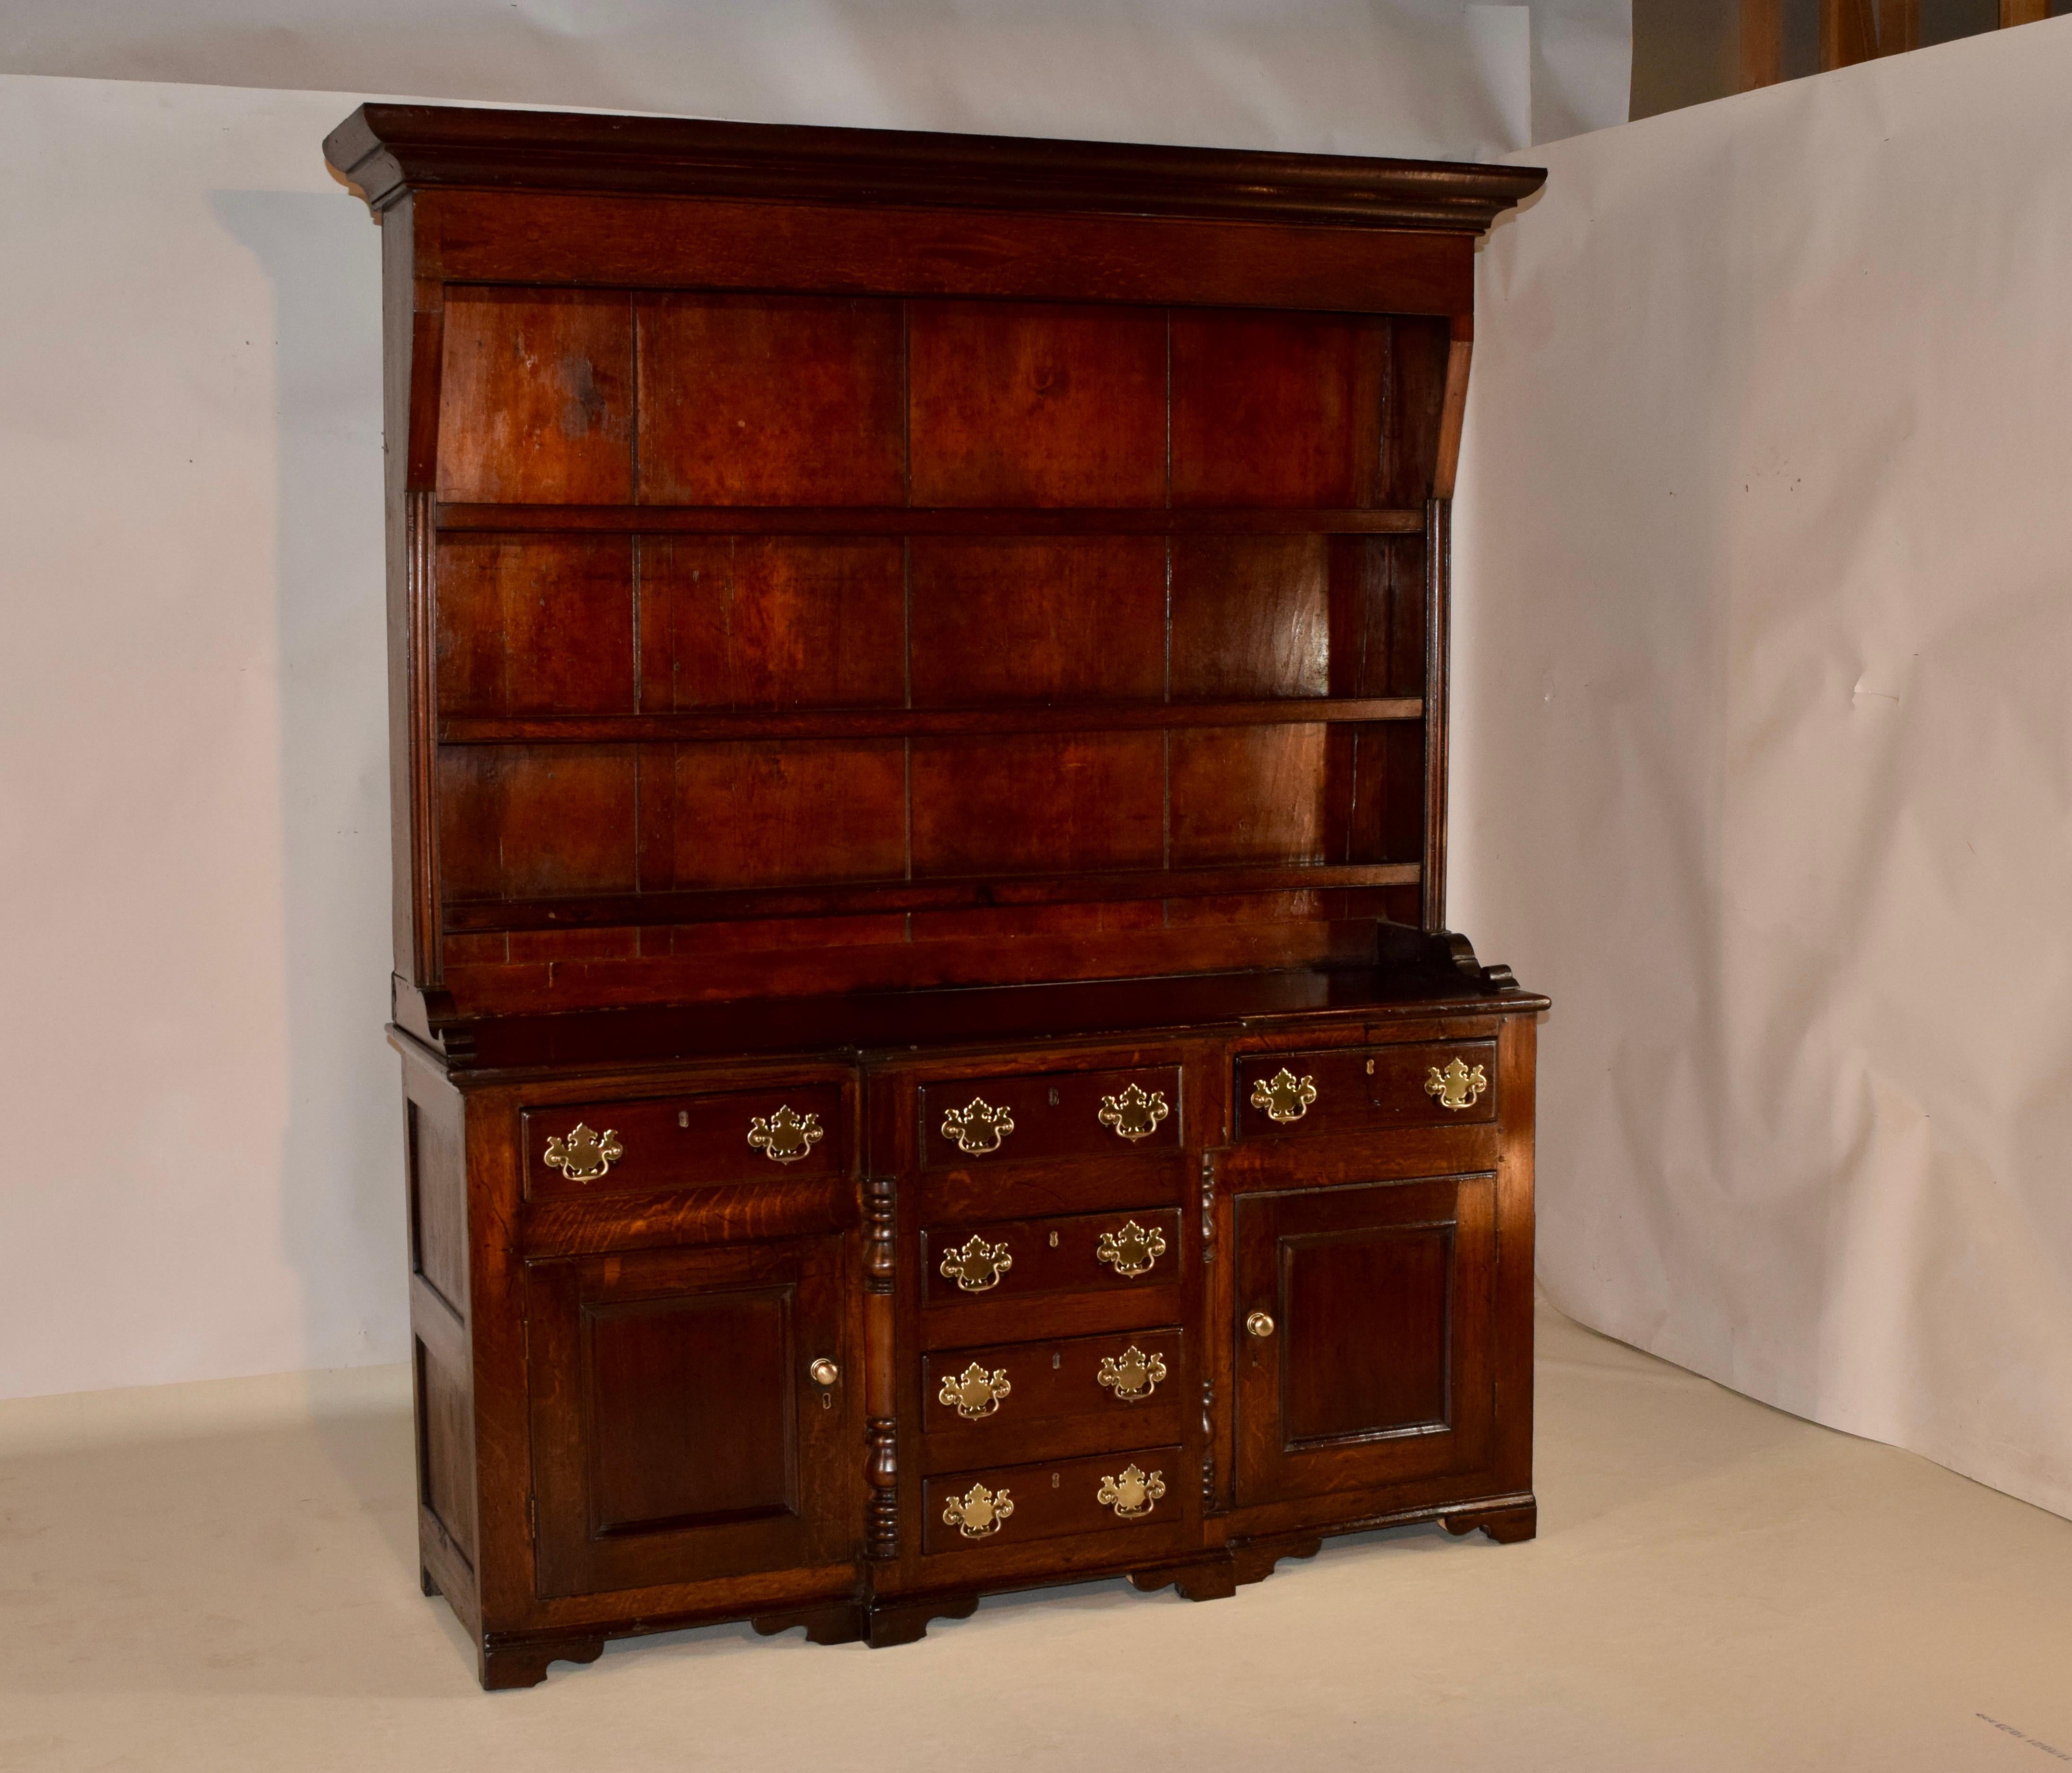 18th century Welsh oak dresser from England. The piece has lovely rich color and wonderful graining throughout. The crown sits atop gorgeous wide backboards which hold three upper shelves, over a fabulous base with two single drawer s over single